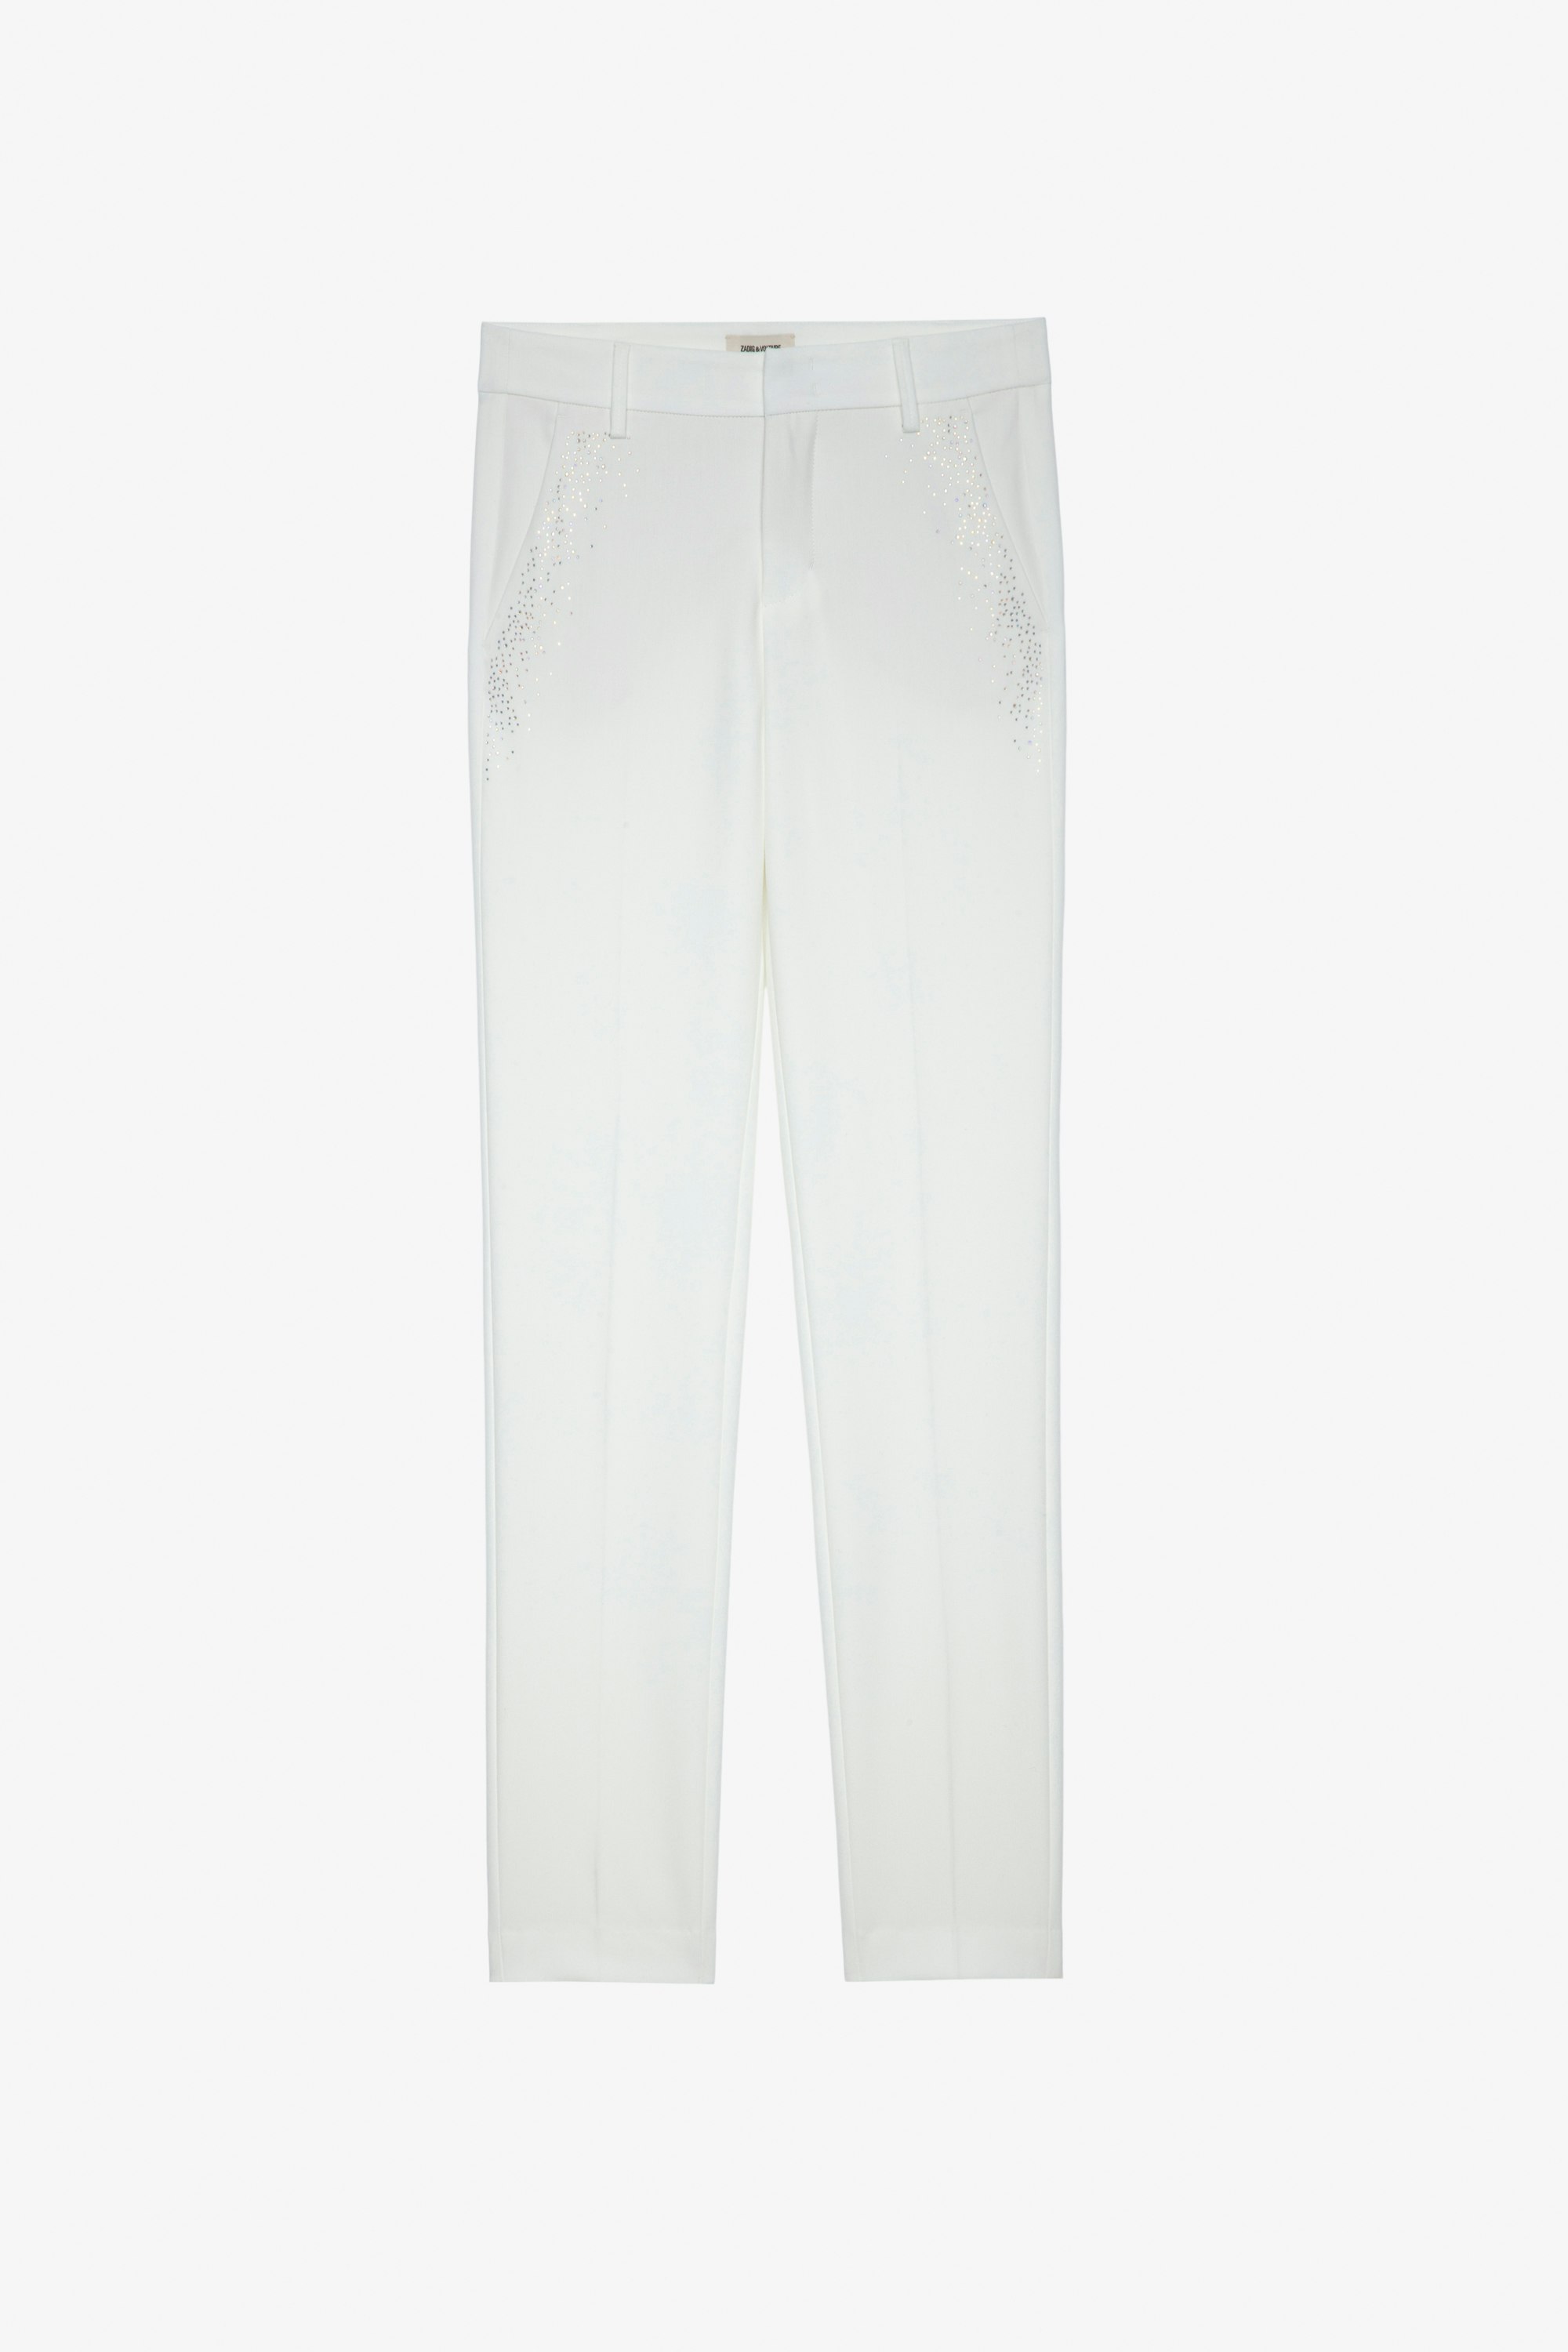 Prune Trousers Women's off-white tailored trousers with rhinestones